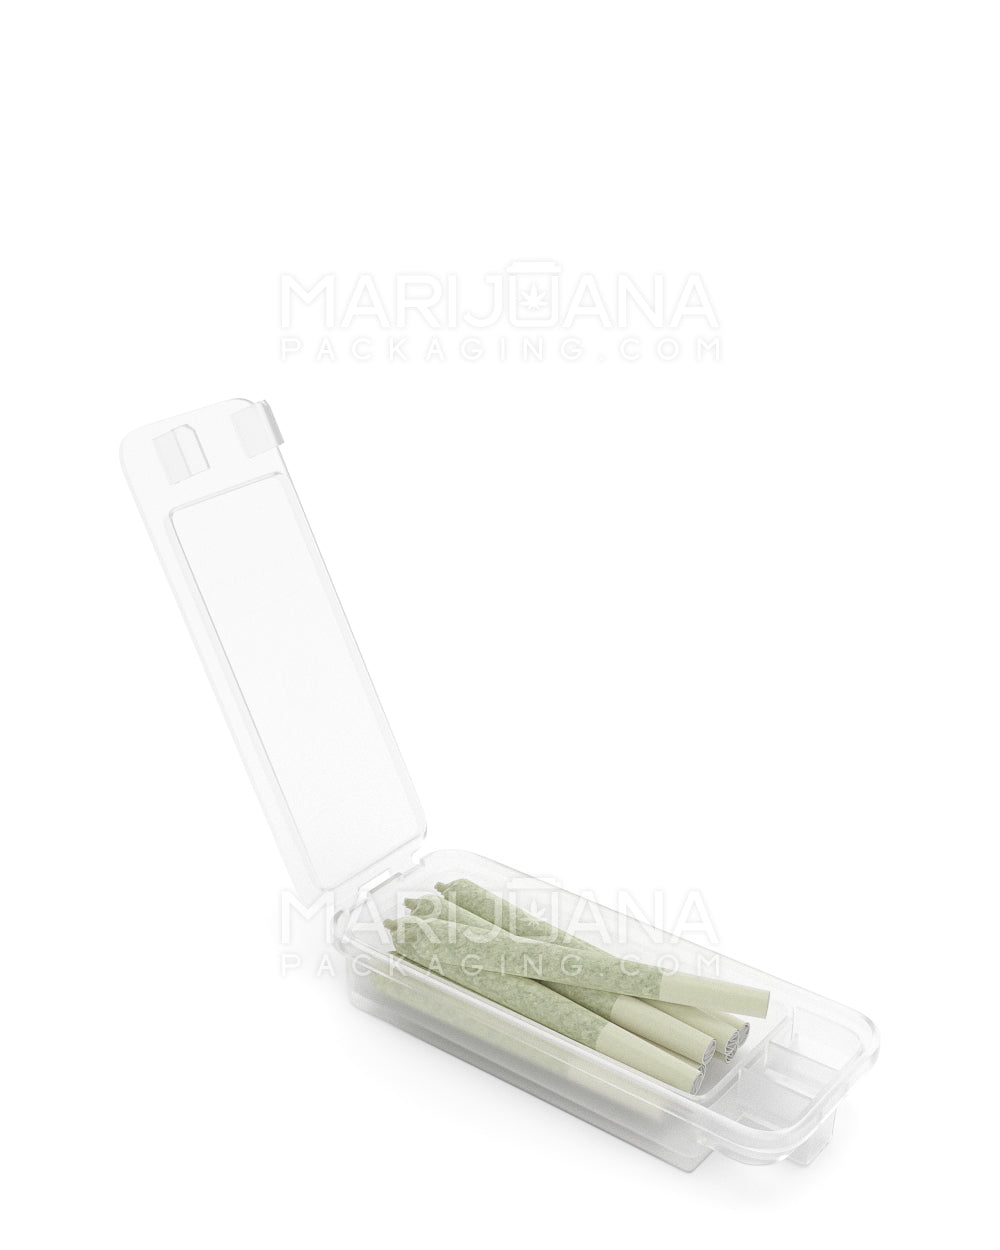 Child Resistant | Snap Box Pre-Roll Joint Case | Small - Clear Plastic - 240 Count - 2